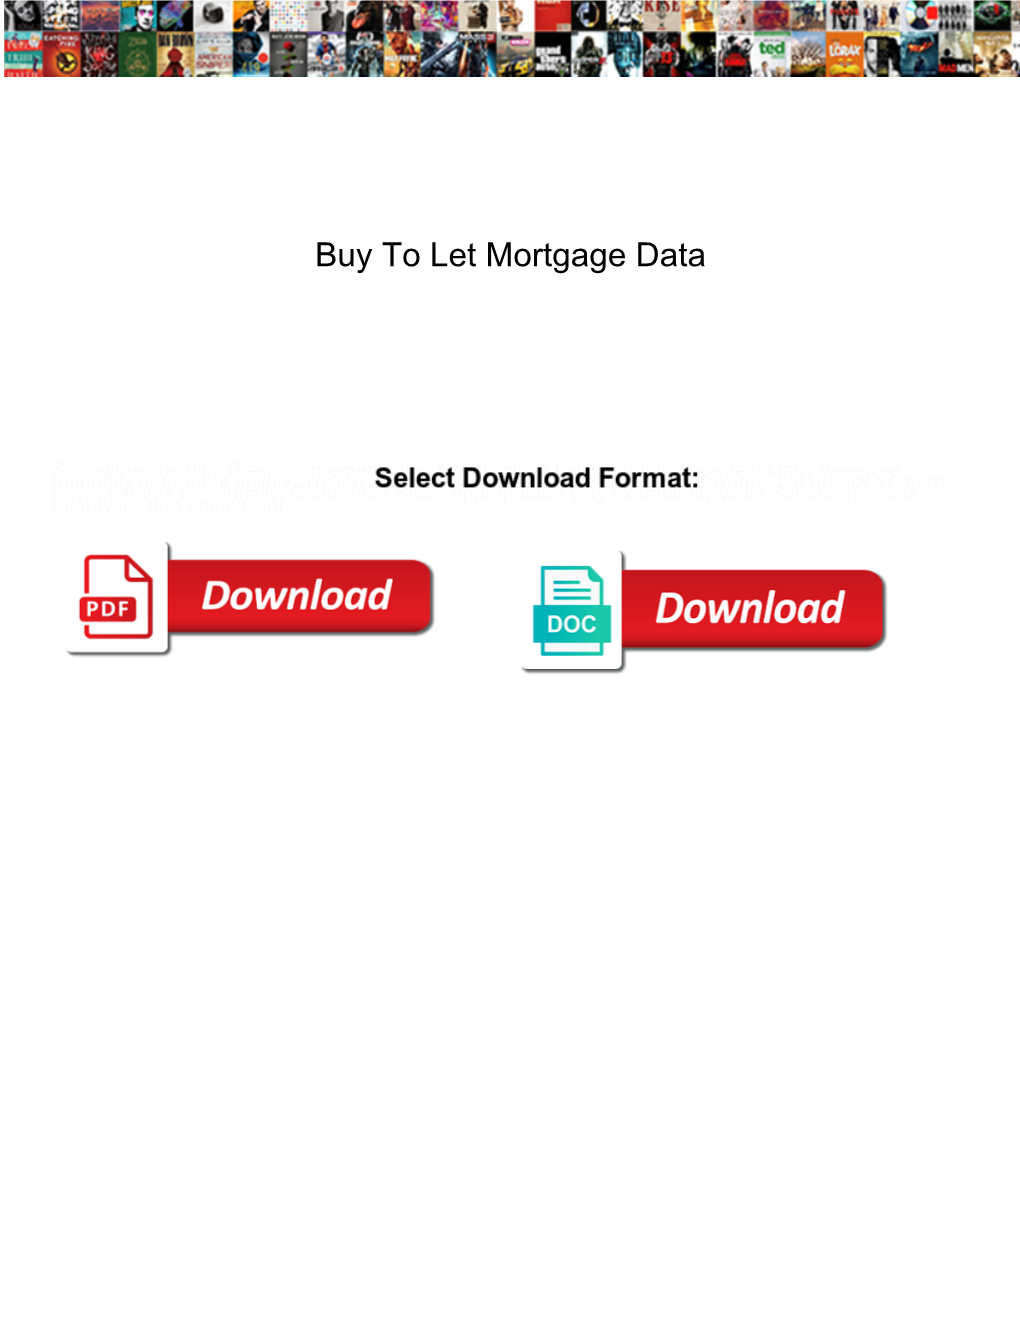 Buy to Let Mortgage Data